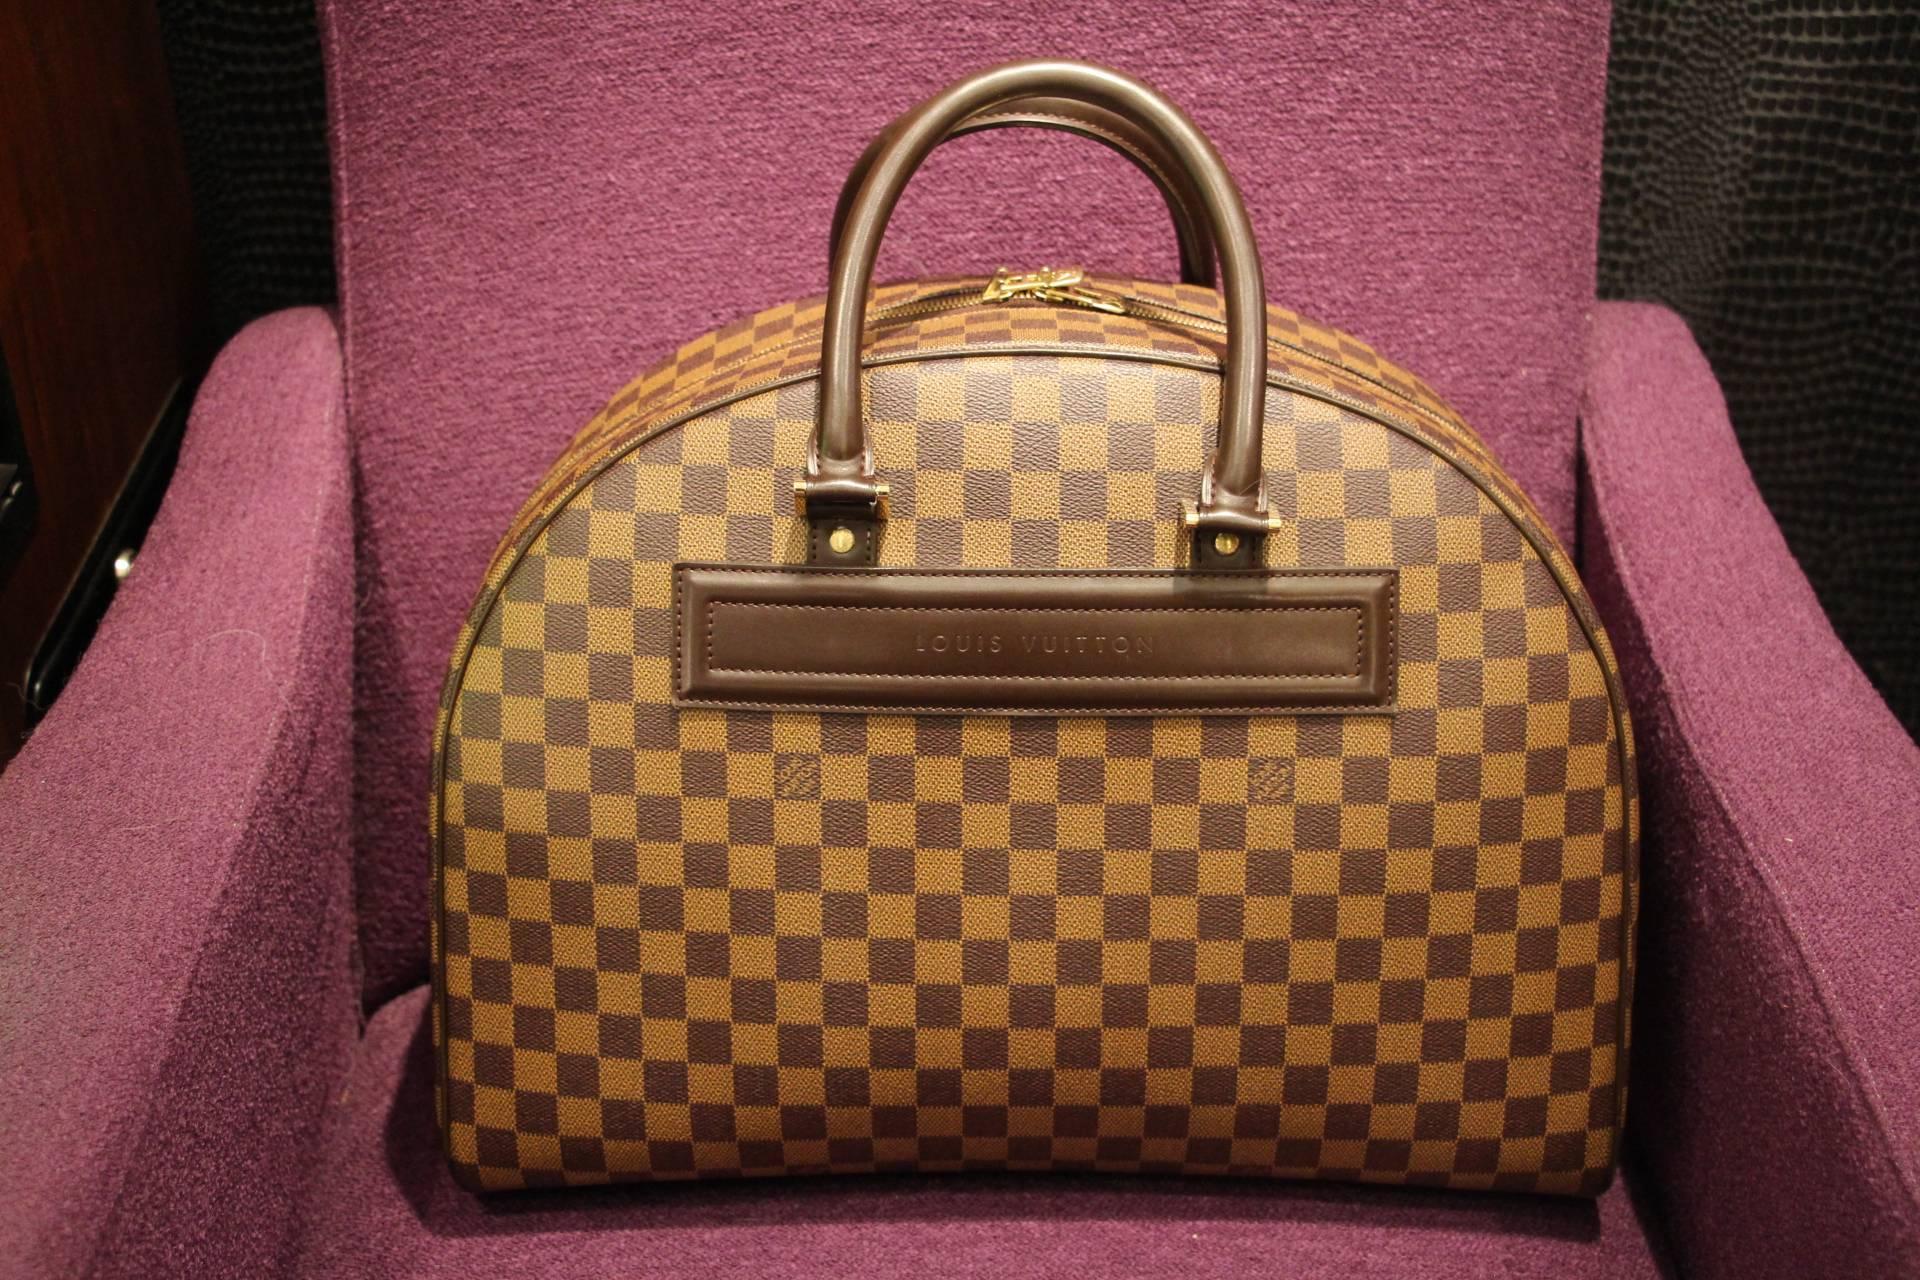 This extra large Louis Vuitton travel bag features leather handles and damier canvas. It has a pocket on one side.
Its interior is all orange coral canvas with a pocket.
As it is no longer sold in Louis Vuitton stores in this size, it is now a